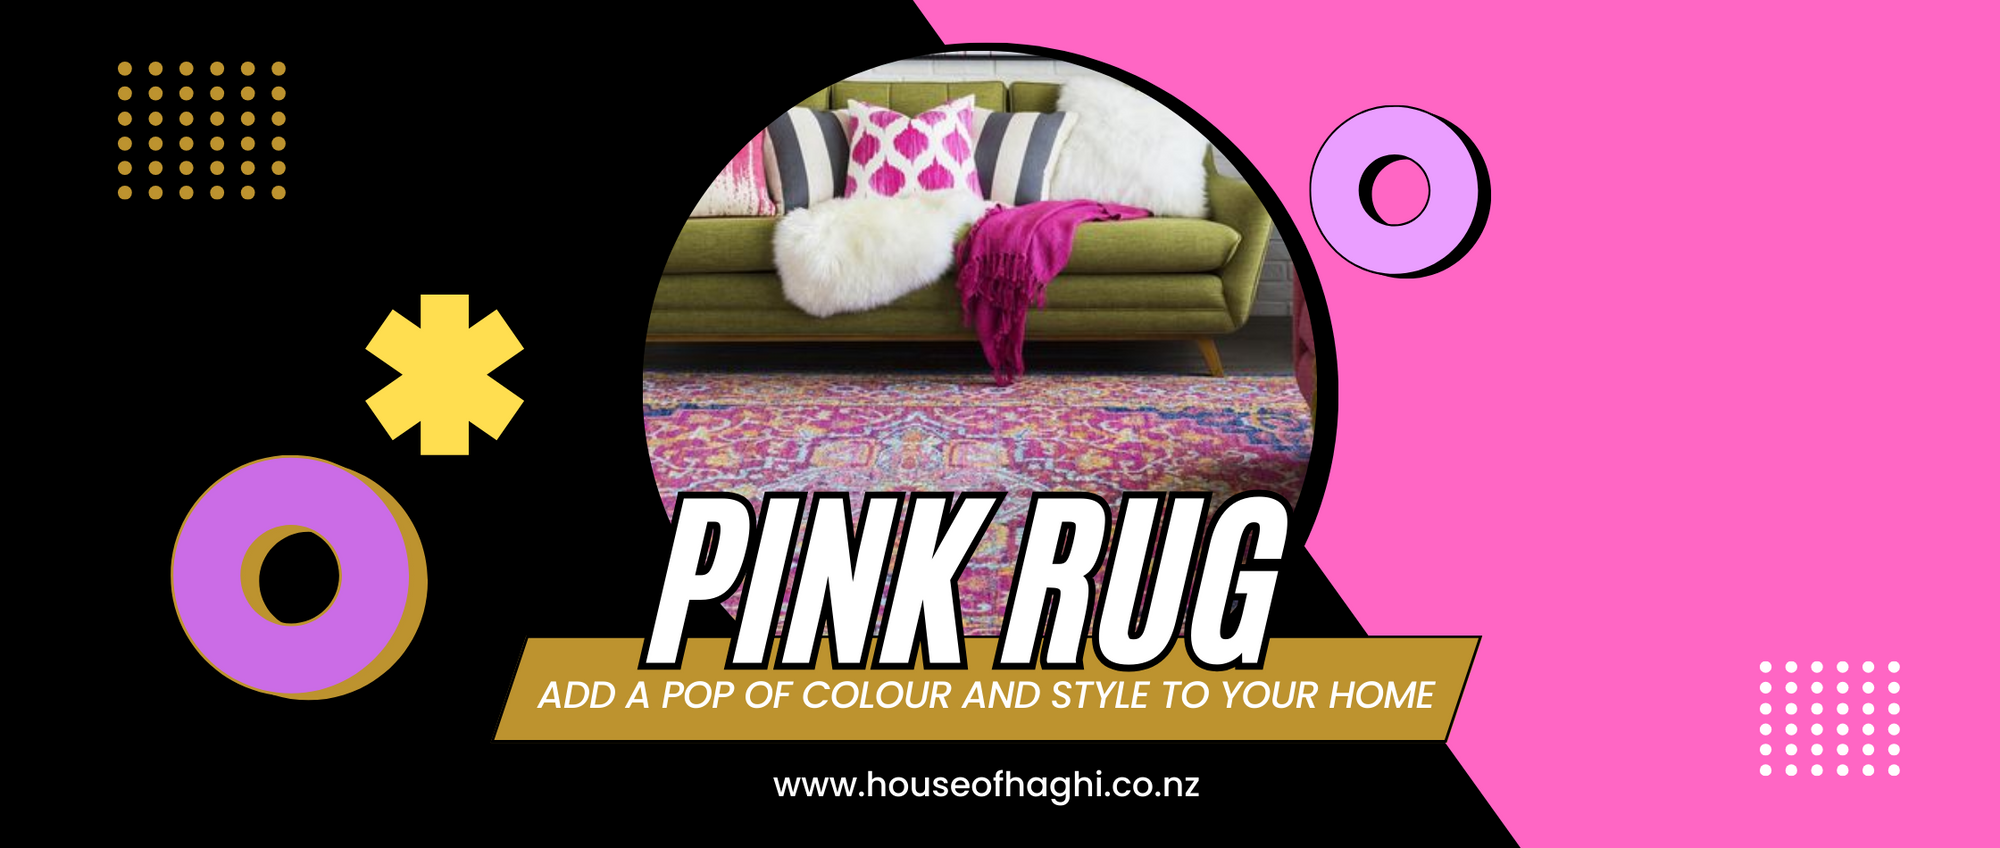 Pink Rug NZ: Add a Pop of Colour and Style to Your Home